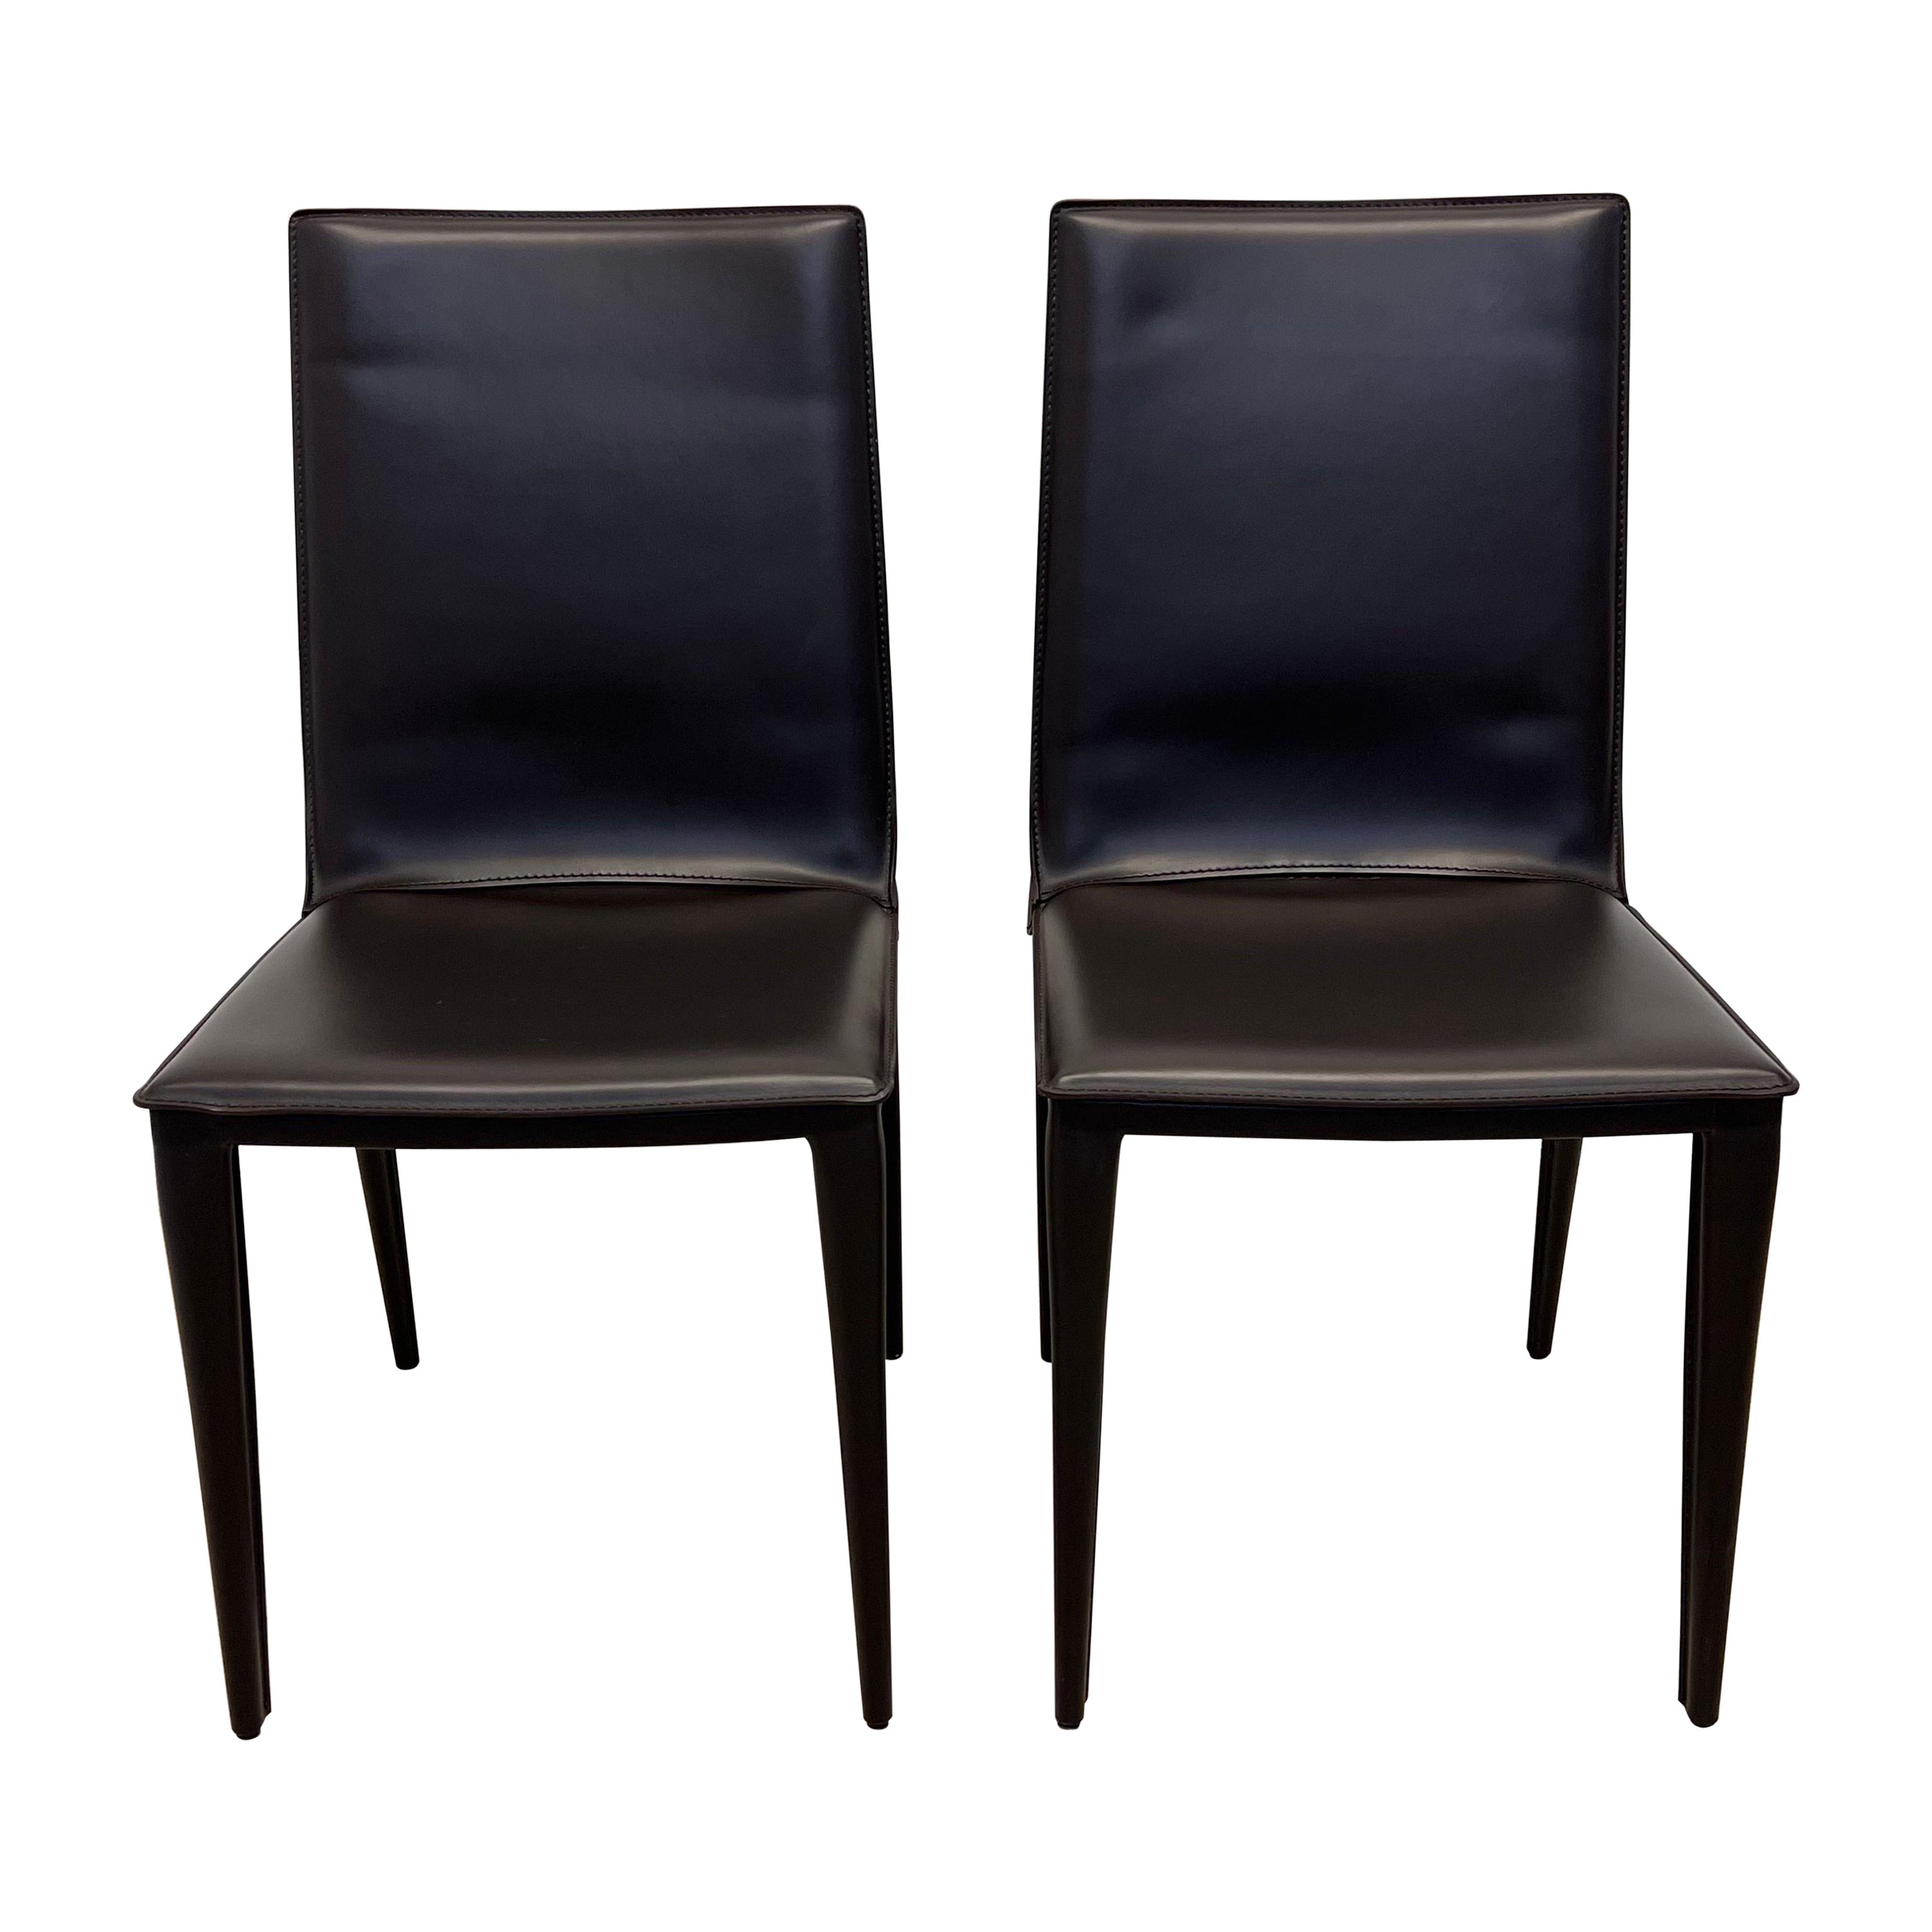 Bottega Leather Dining Chairs by Fauciglietti and Bianchi for DWR, Pair For Sale